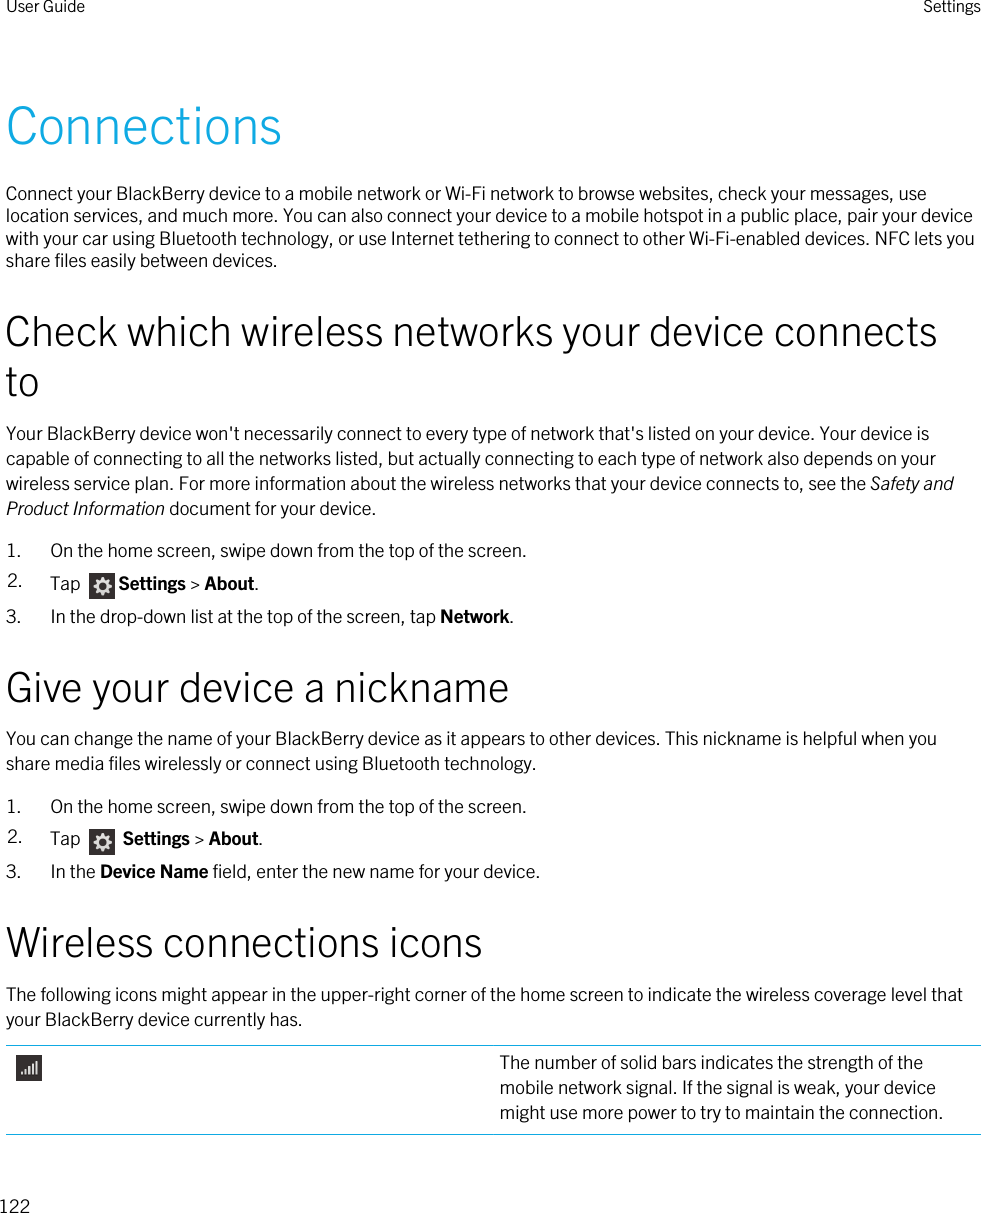 ConnectionsConnect your BlackBerry device to a mobile network or Wi-Fi network to browse websites, check your messages, use location services, and much more. You can also connect your device to a mobile hotspot in a public place, pair your device with your car using Bluetooth technology, or use Internet tethering to connect to other Wi-Fi-enabled devices. NFC lets you share files easily between devices.Check which wireless networks your device connects toYour BlackBerry device won&apos;t necessarily connect to every type of network that&apos;s listed on your device. Your device is capable of connecting to all the networks listed, but actually connecting to each type of network also depends on your wireless service plan. For more information about the wireless networks that your device connects to, see the Safety and Product Information document for your device.1. On the home screen, swipe down from the top of the screen.2. Tap  Settings &gt; About.3. In the drop-down list at the top of the screen, tap Network.Give your device a nicknameYou can change the name of your BlackBerry device as it appears to other devices. This nickname is helpful when you share media files wirelessly or connect using Bluetooth technology.1. On the home screen, swipe down from the top of the screen.2. Tap   Settings &gt; About.3. In the Device Name field, enter the new name for your device.Wireless connections iconsThe following icons might appear in the upper-right corner of the home screen to indicate the wireless coverage level that your BlackBerry device currently has.The number of solid bars indicates the strength of the mobile network signal. If the signal is weak, your device might use more power to try to maintain the connection.User Guide Settings122